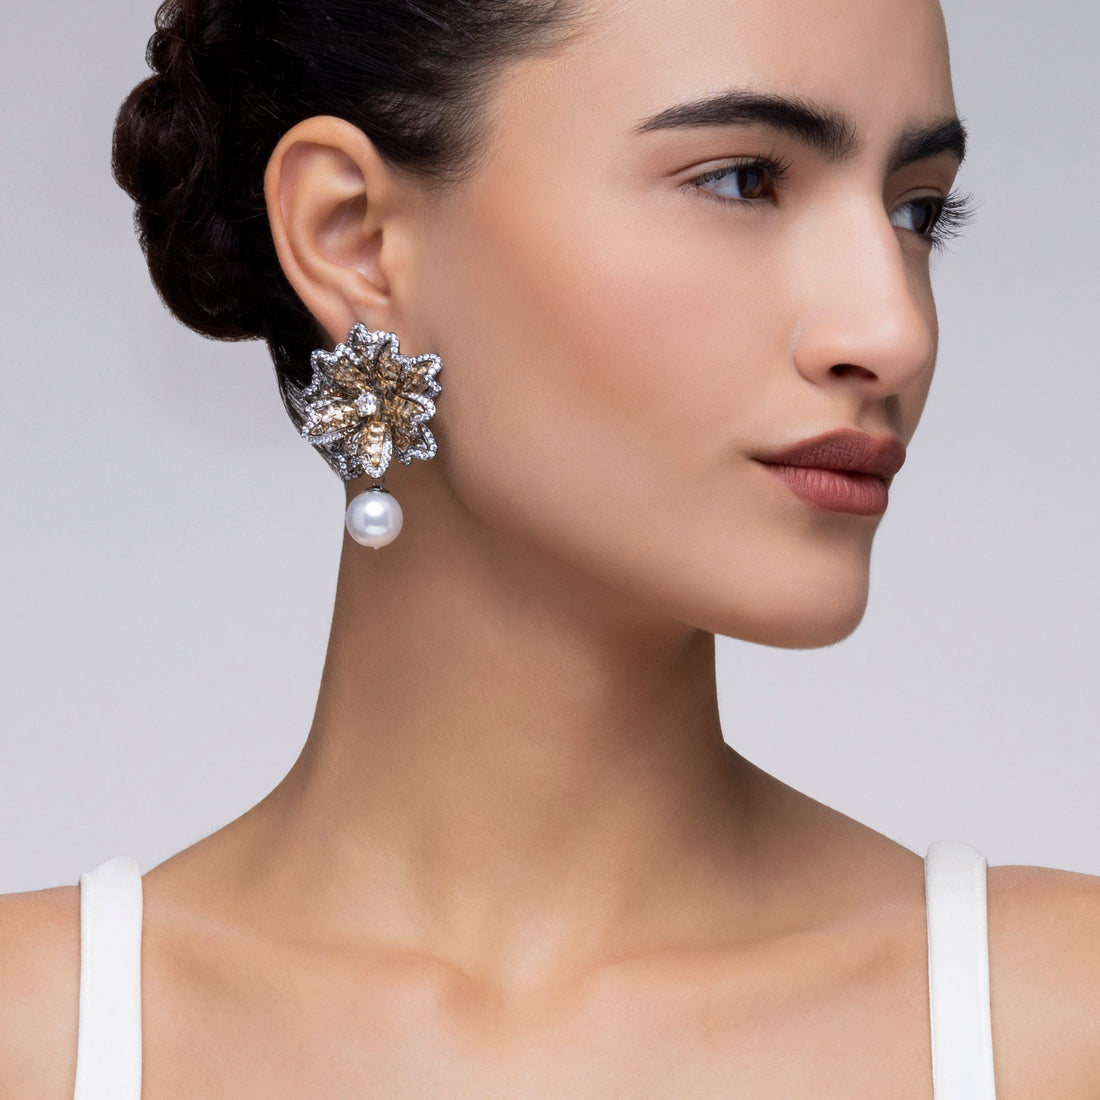 Stunning Statement Earrings BY PRAO